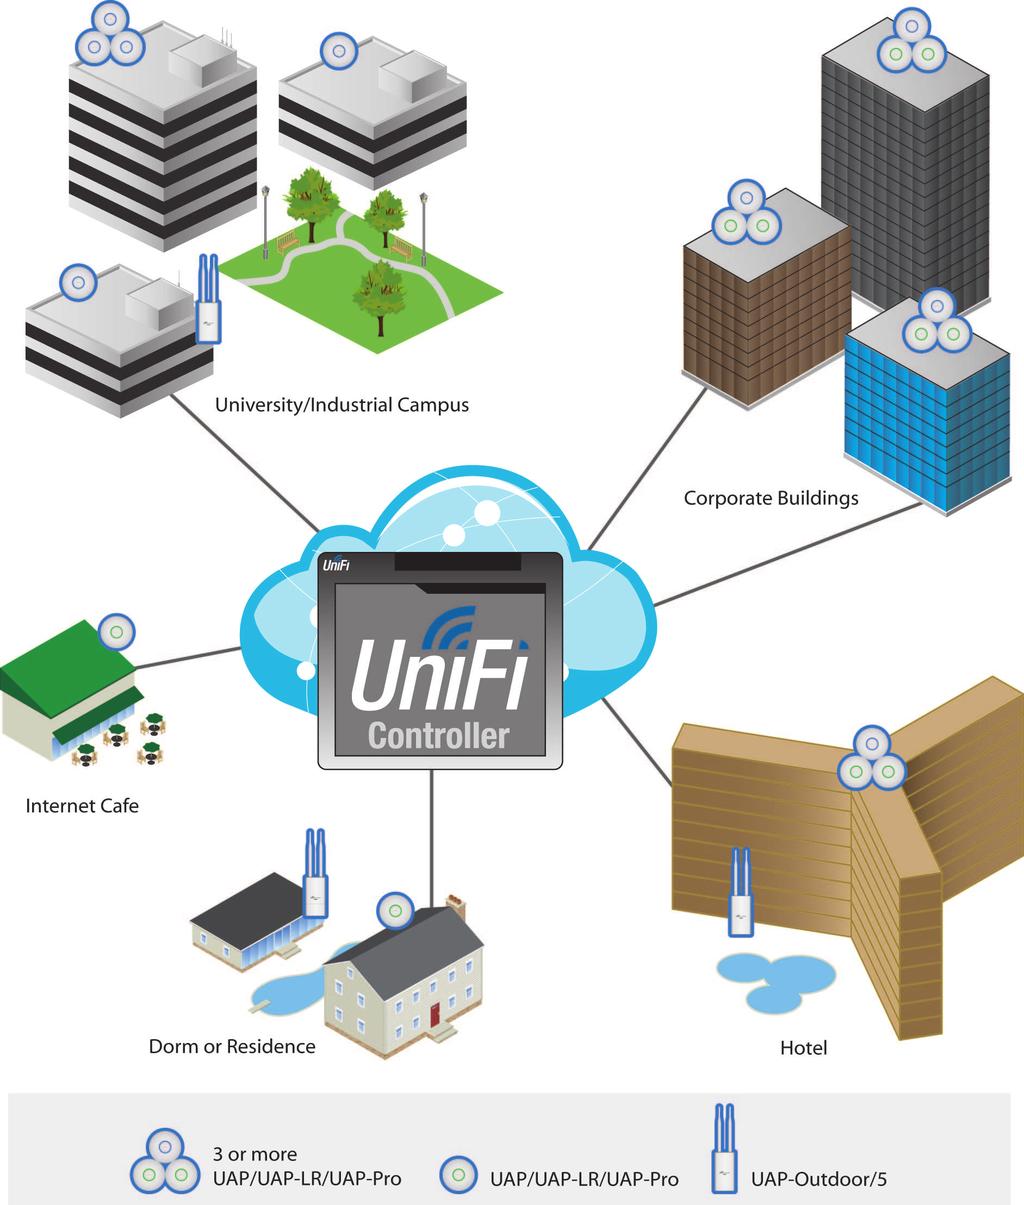 With the UniFi Controller software running in a NOC or in the cloud, administrators can extend and centrally manage wide areas of indoor and outdoor coverage using any combination of UniFi AP devices.